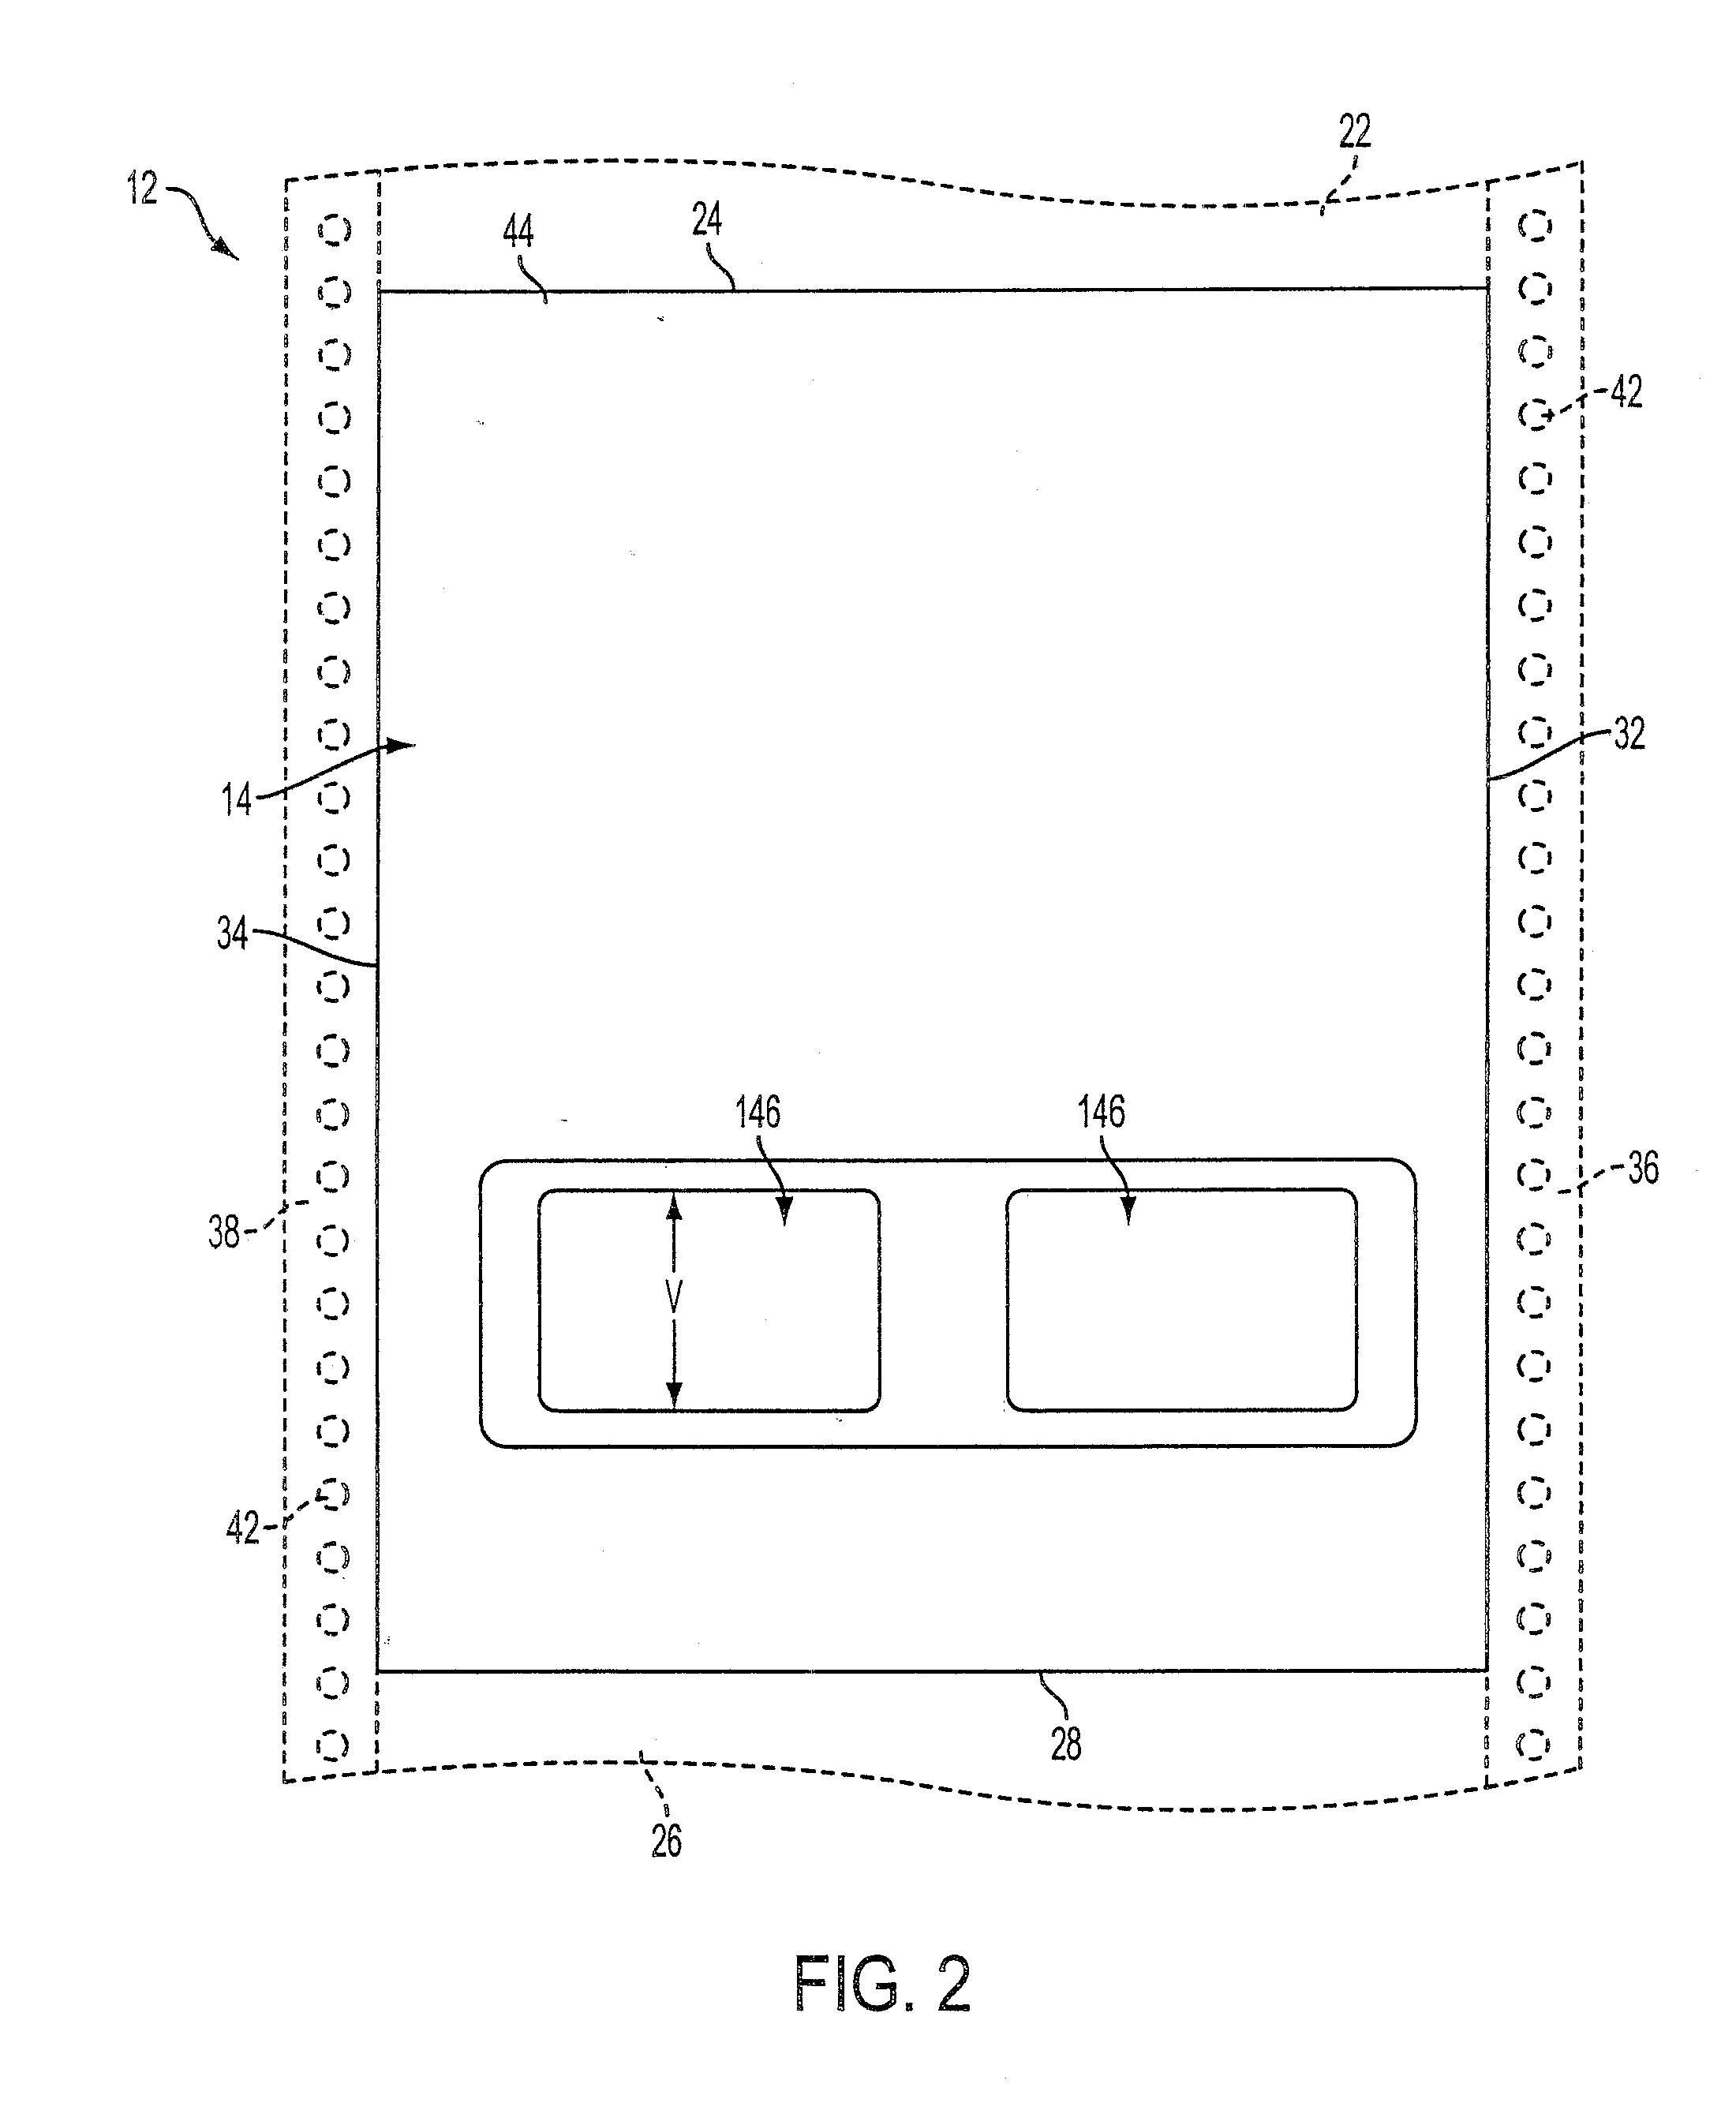 Document Sheet With Recessed Cavity and Window Two-Sided Printing of an Object Received Therein